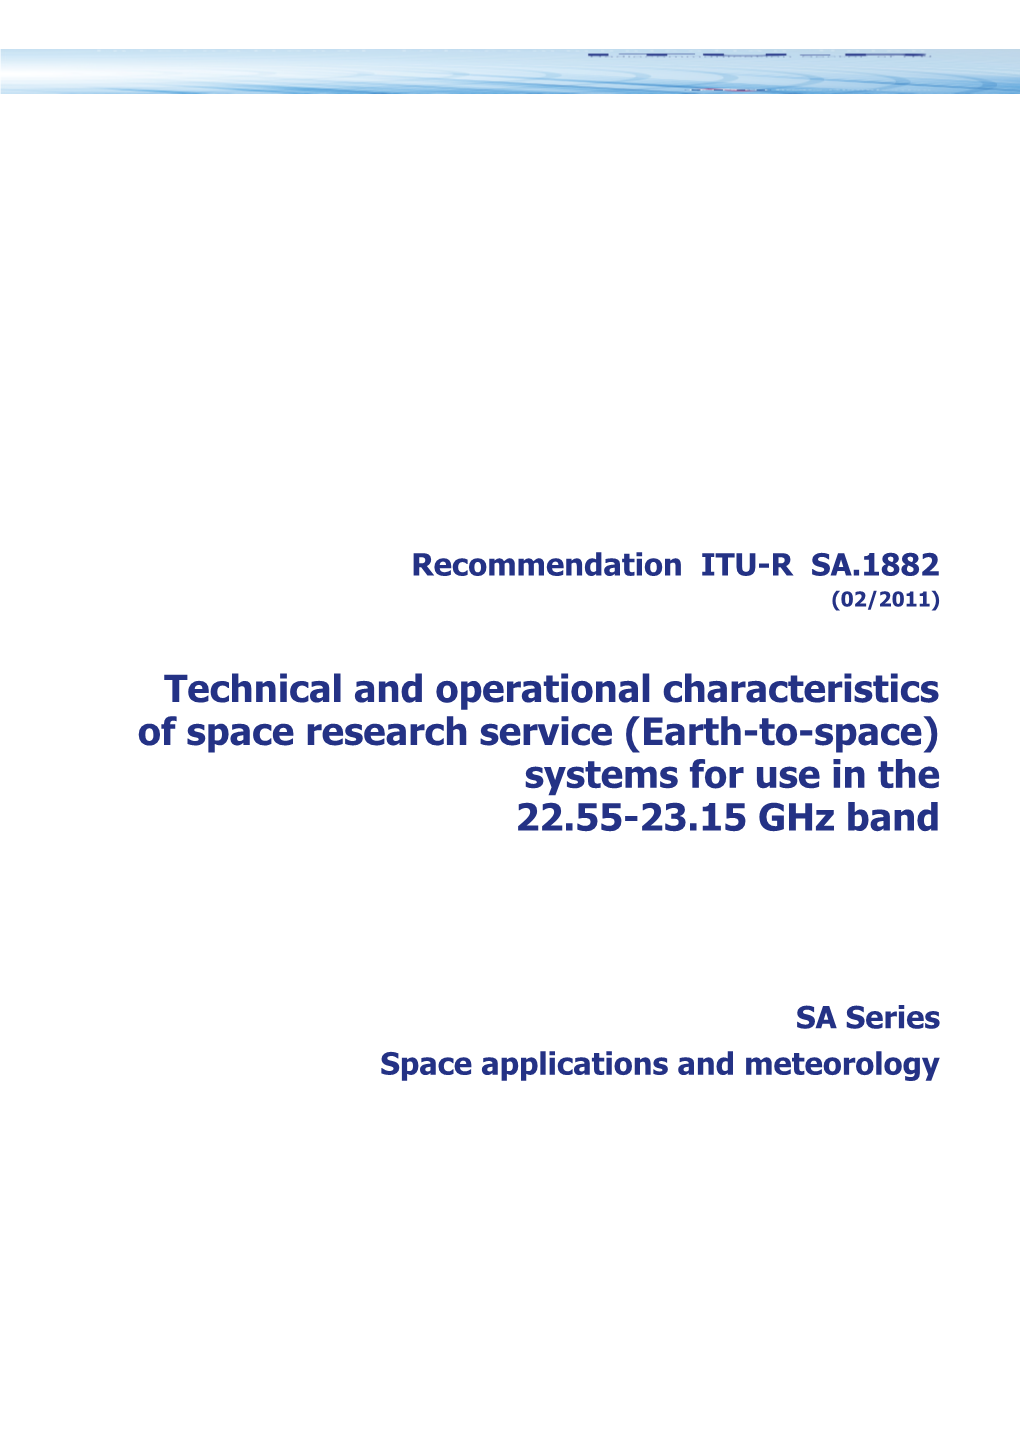 RECOMMENDATION ITU-R SA.1882 - Technical and Operational Characteristics of Space Research